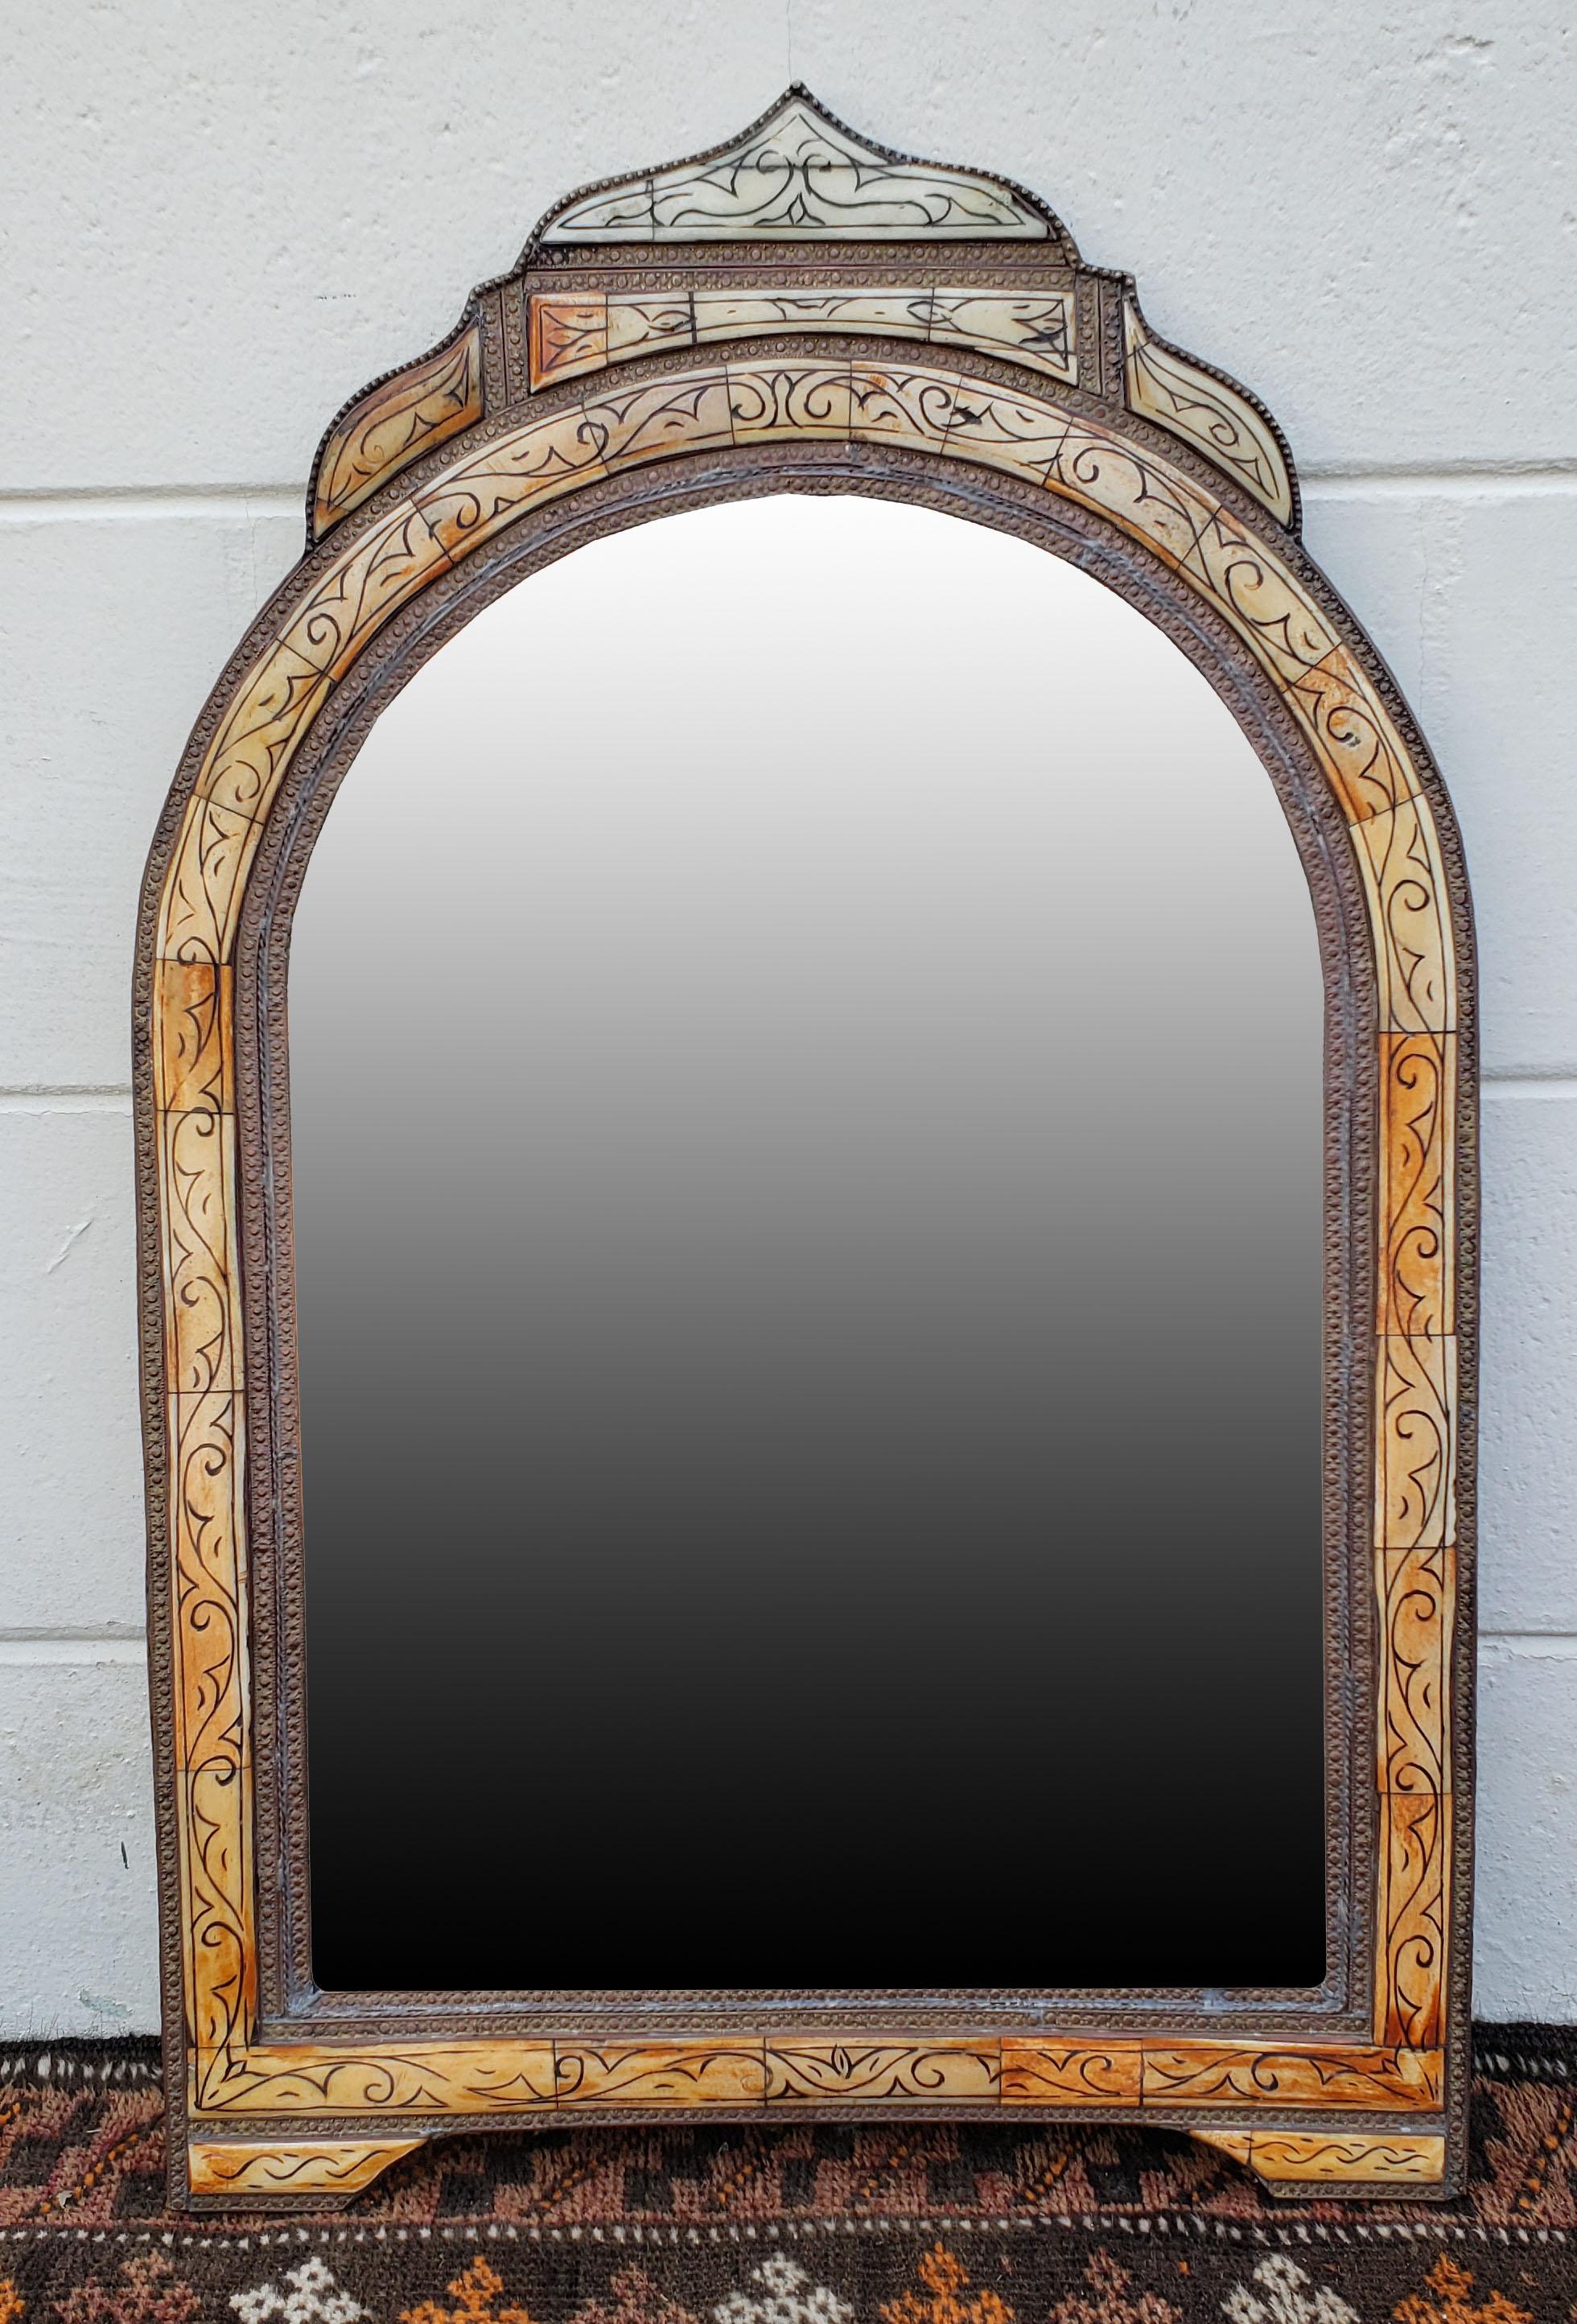 Small size metal and camel bone inlay Moroccan mirror. Made in the city of Marrakech. Rectangular shape with an arched top, and measuring approximately 28